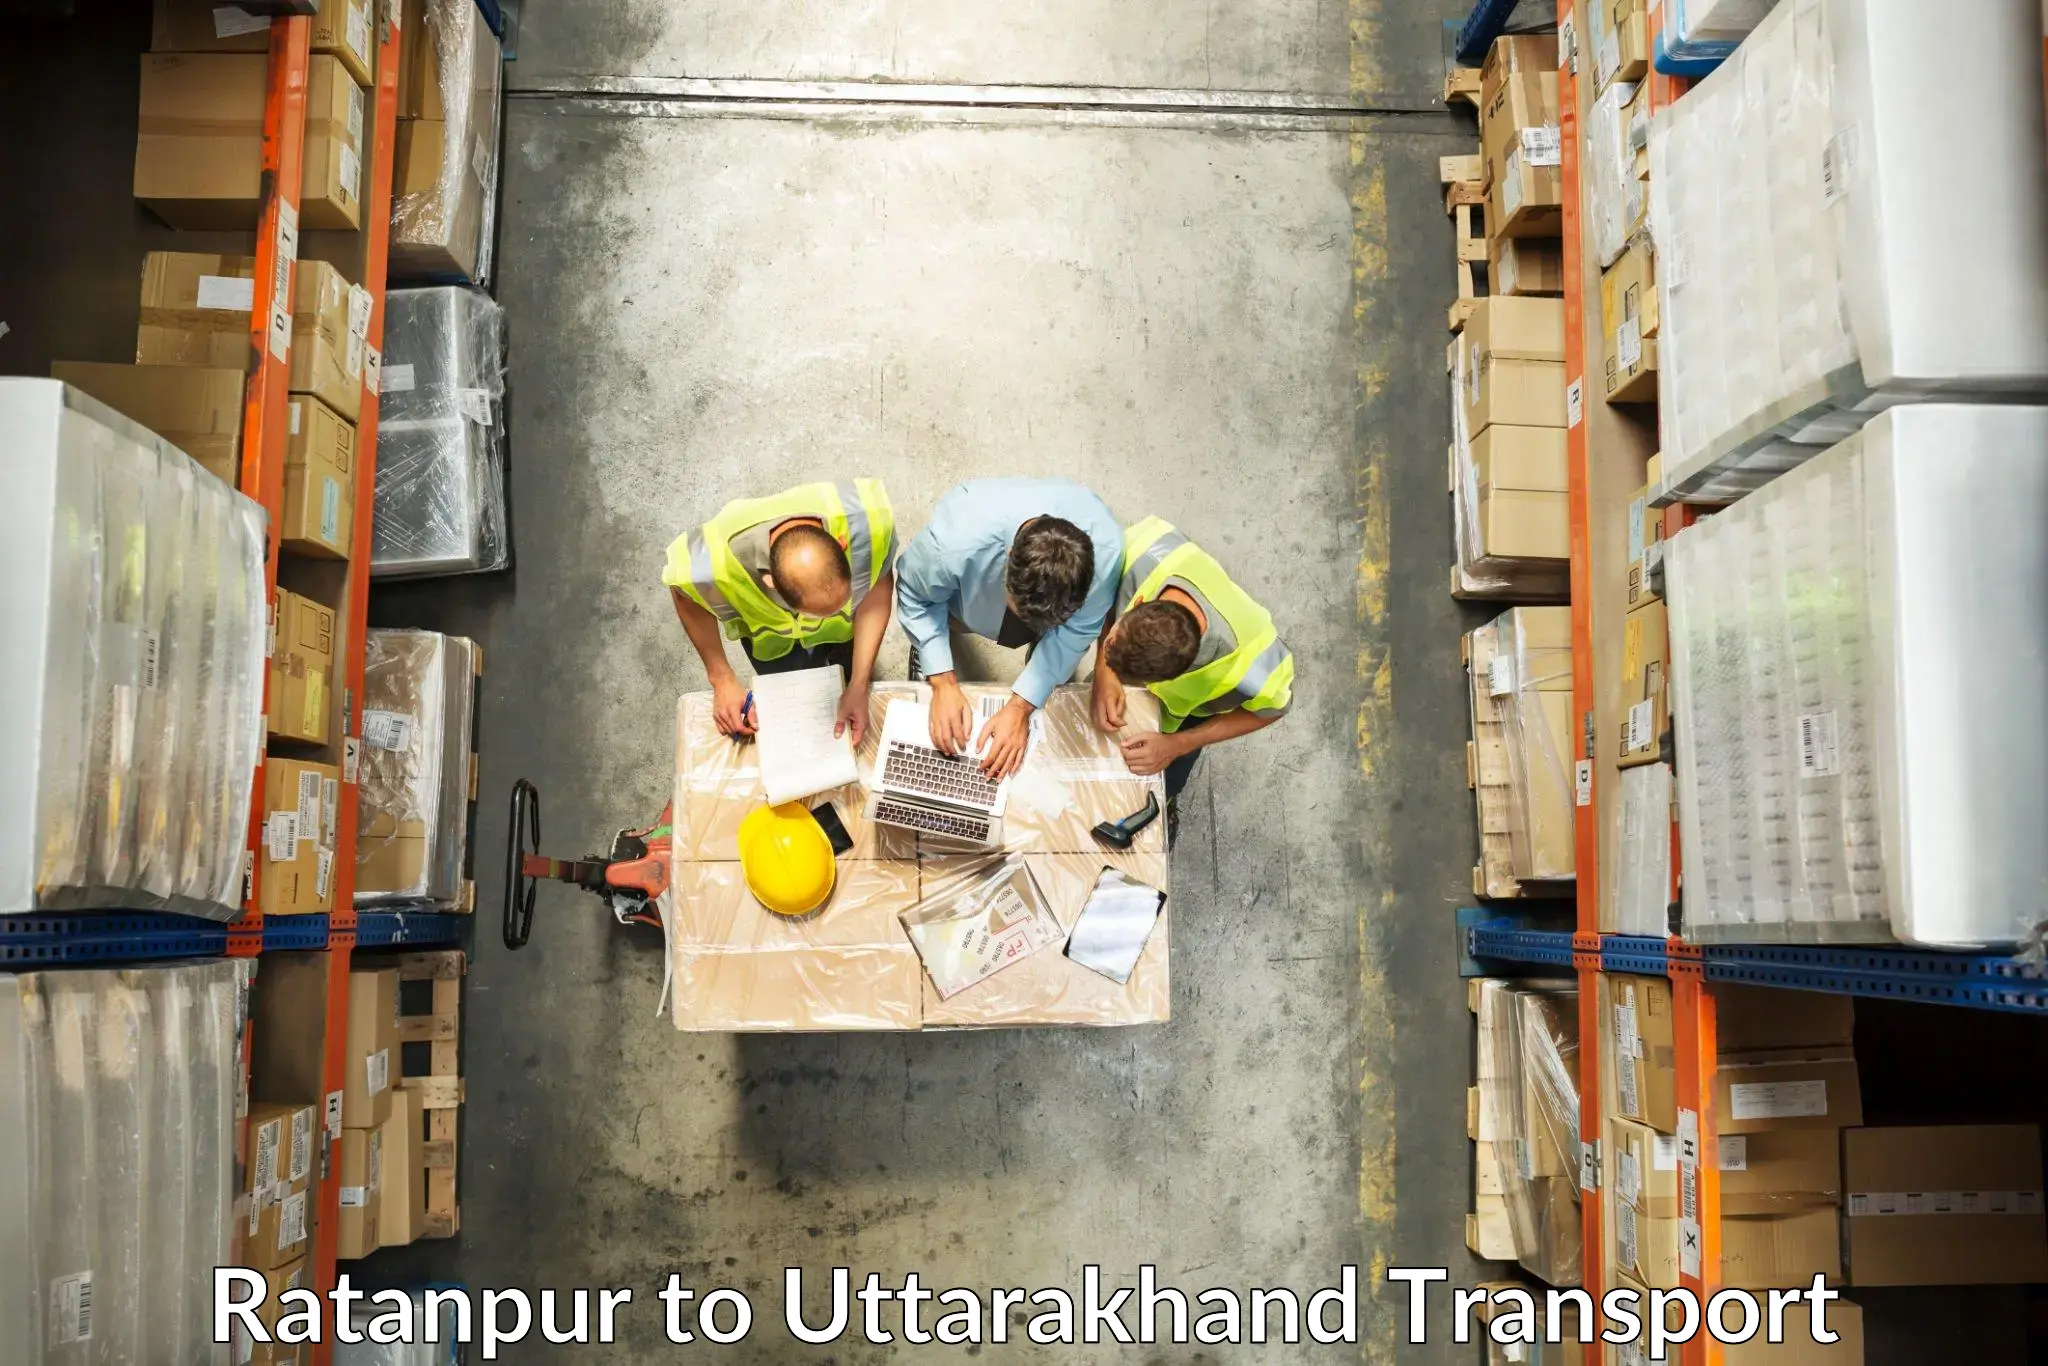 Part load transport service in India Ratanpur to Kashipur